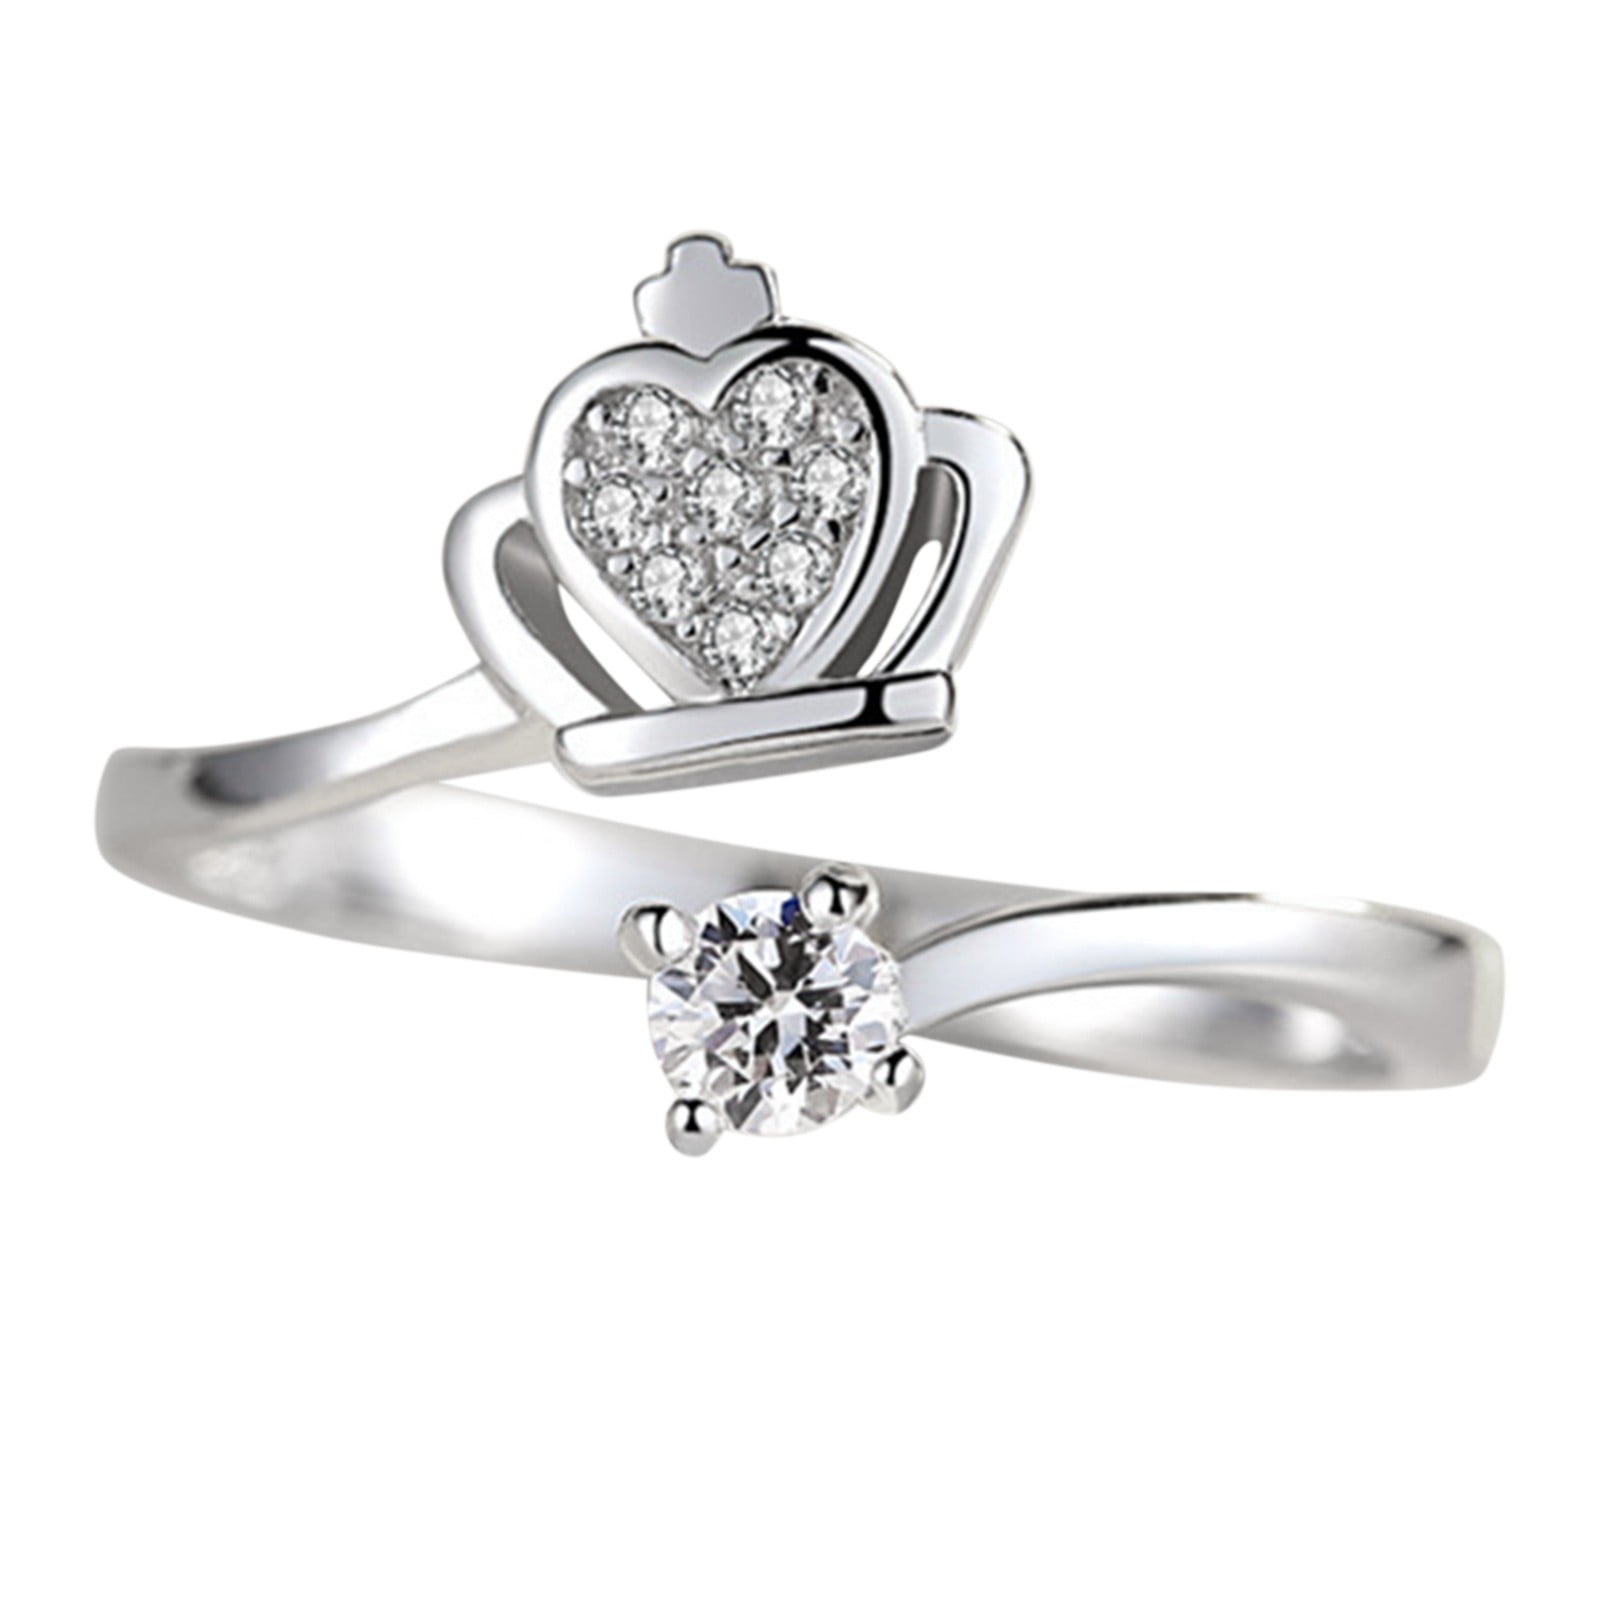 Thoughts on Walmart rings? : r/EngagementRings